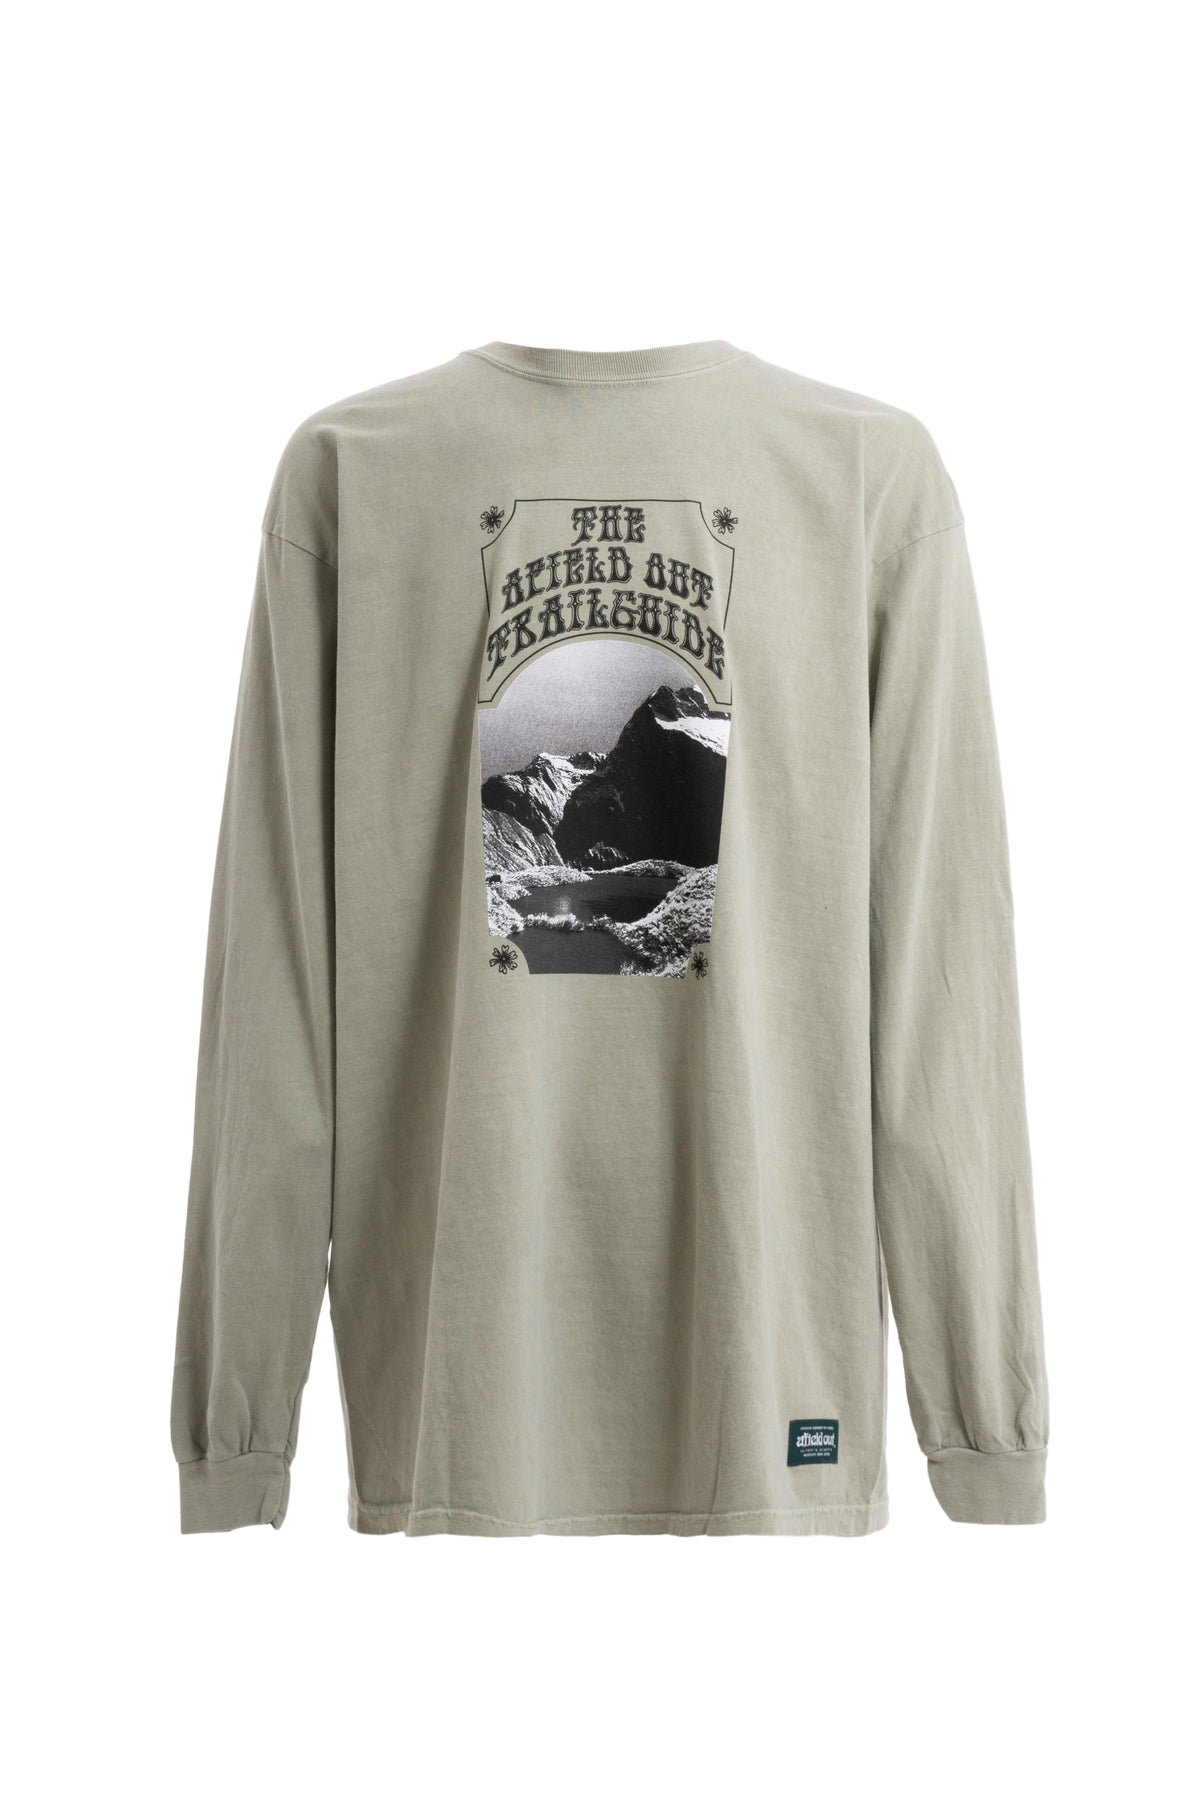 TRAIL GUIDE L/S T-SHIRT / SAND